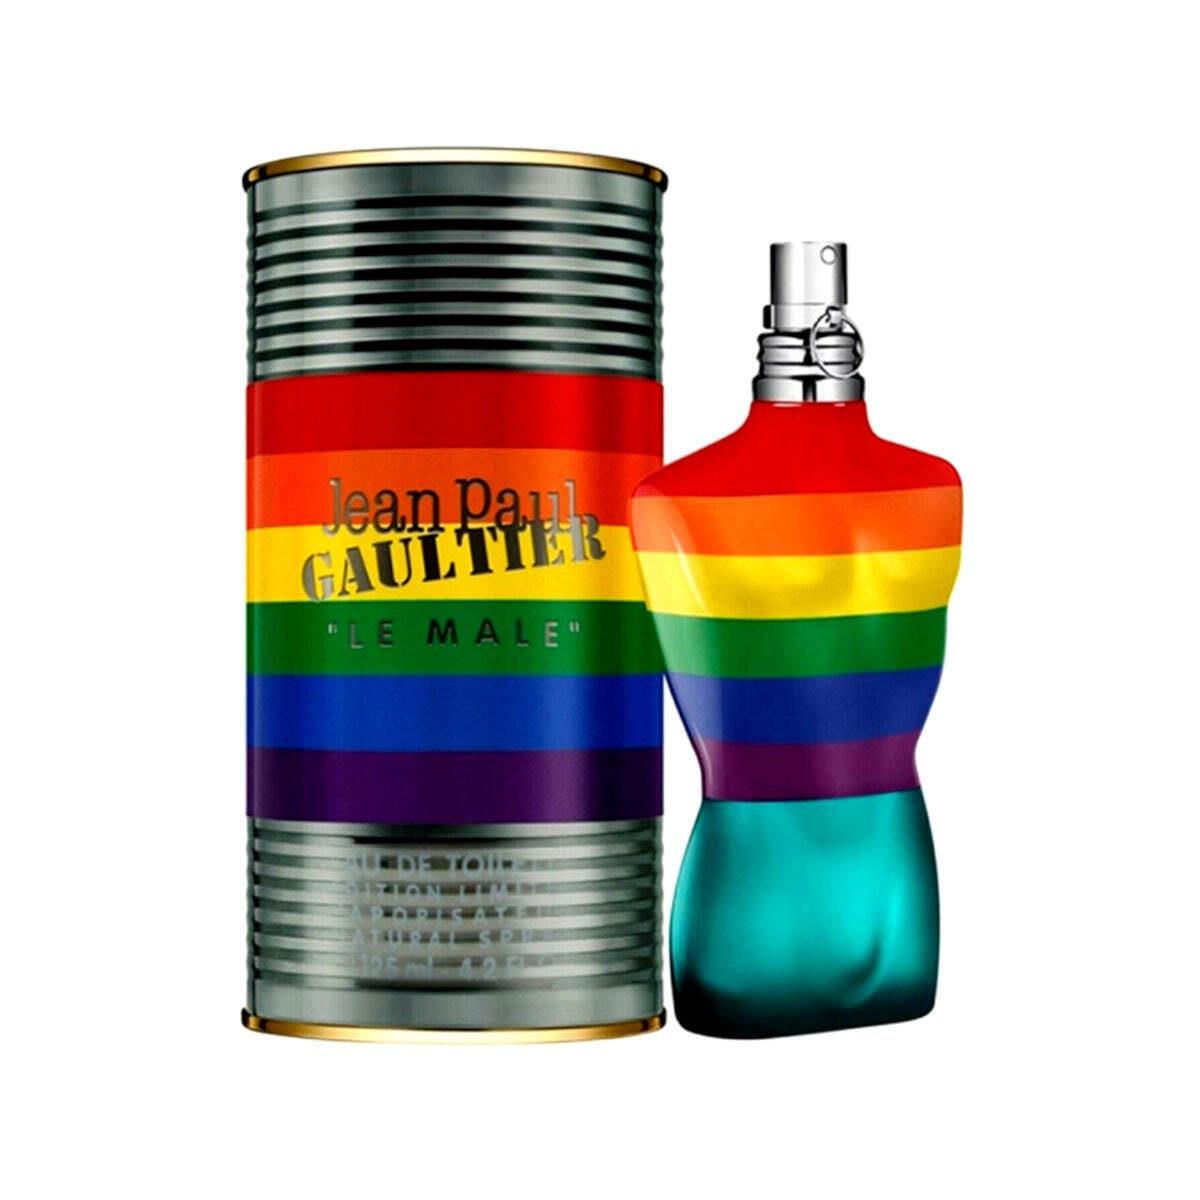 Le Male by Jean Paul Gaultier Cologne Edt 4.2 oz In Can